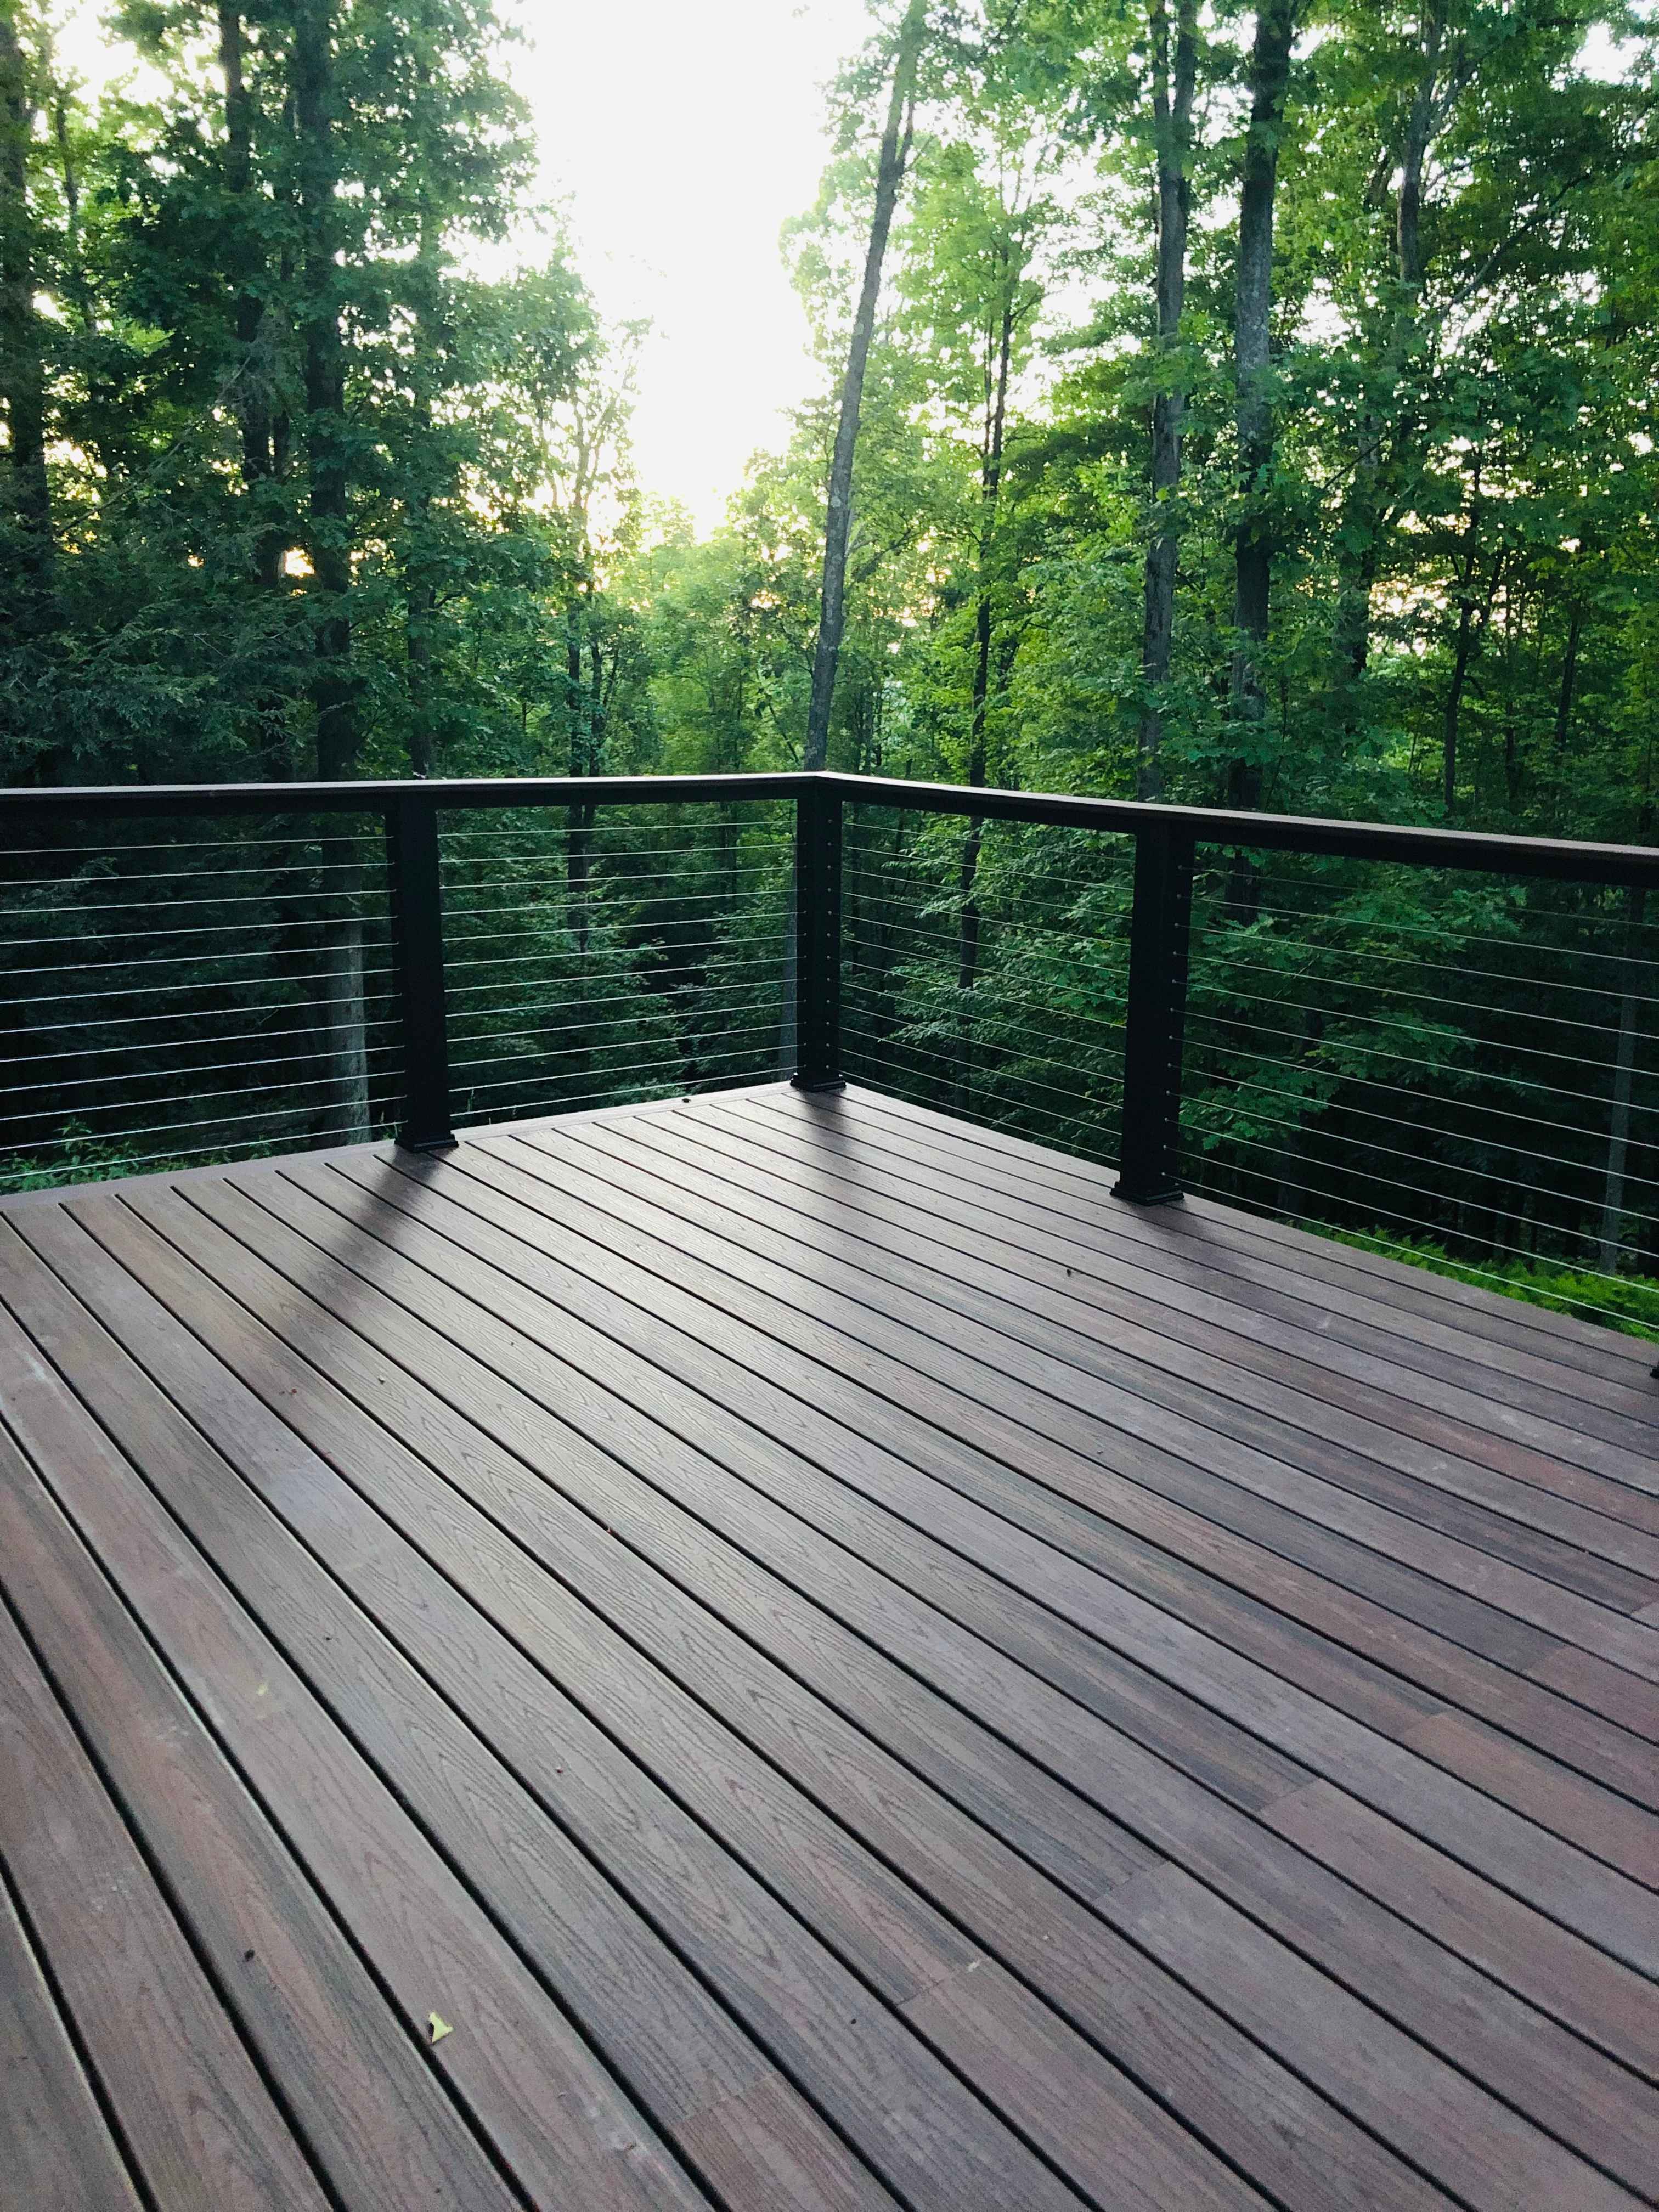 Cable Railing with trees behind it